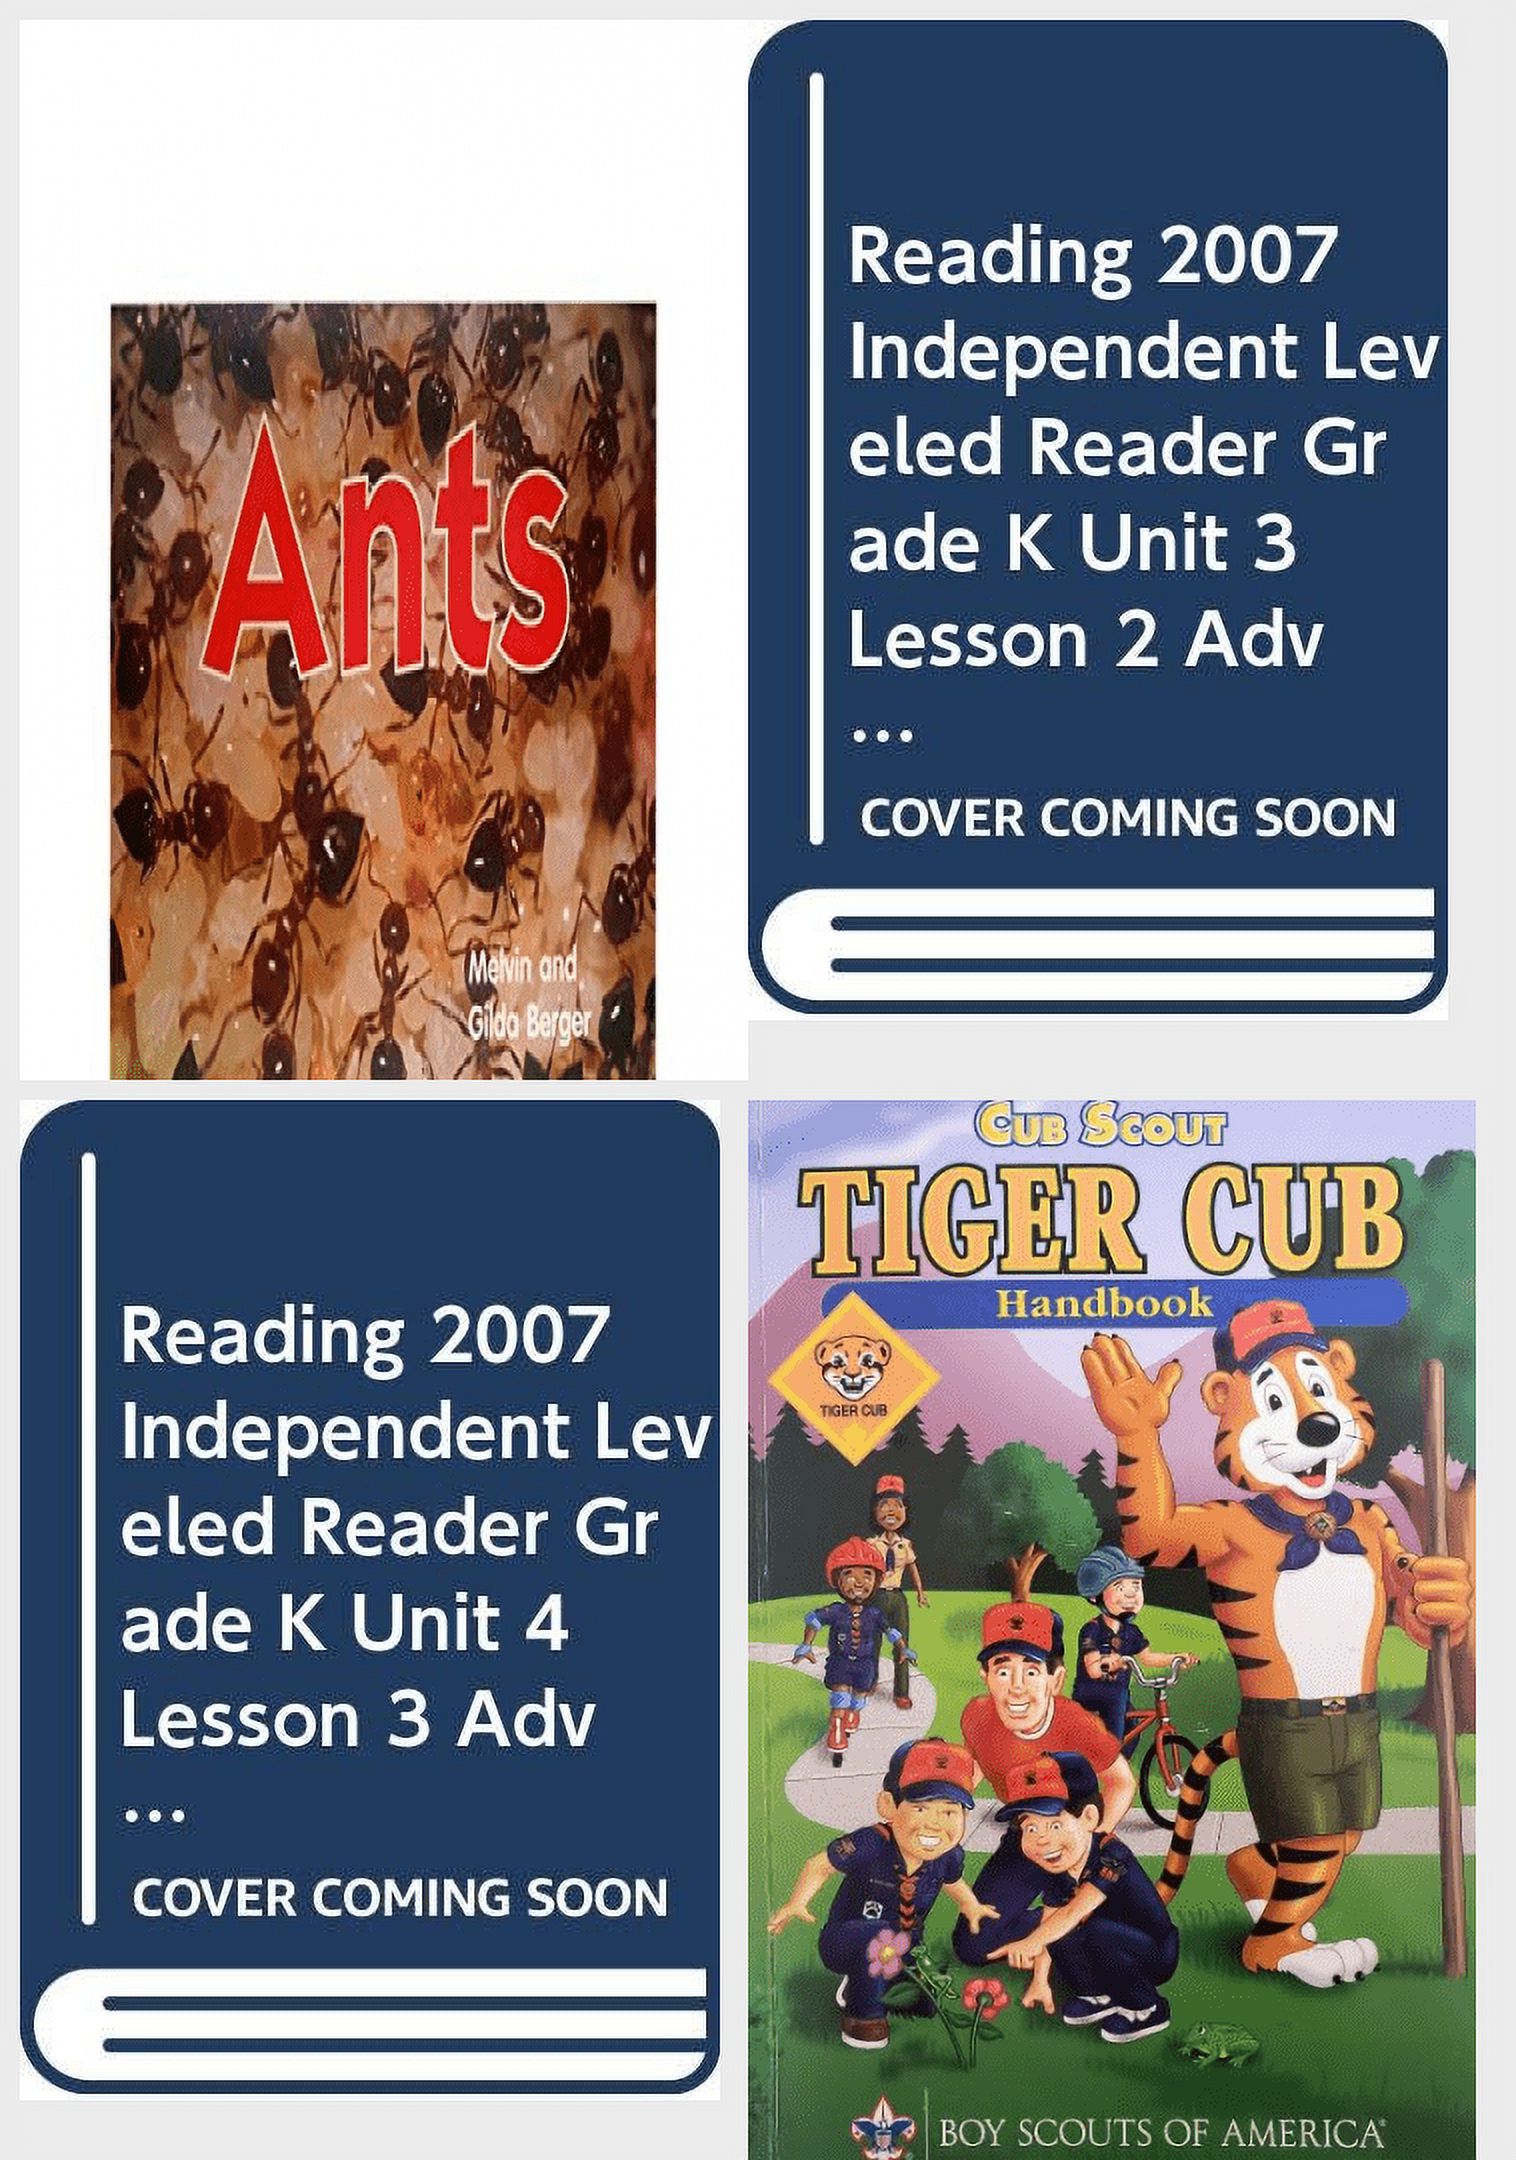 UNIT　2007　Educational　Scholastic　K　READING　GRADE　3-5):　Pack　Fun　Book　I　Ants　LEVELED　Bundle　INDEPENDENT　Readers,　(Ages　Time-to-Discover　ADVANCED,　READER　2007　LESSON　READING　Children's　Paperback